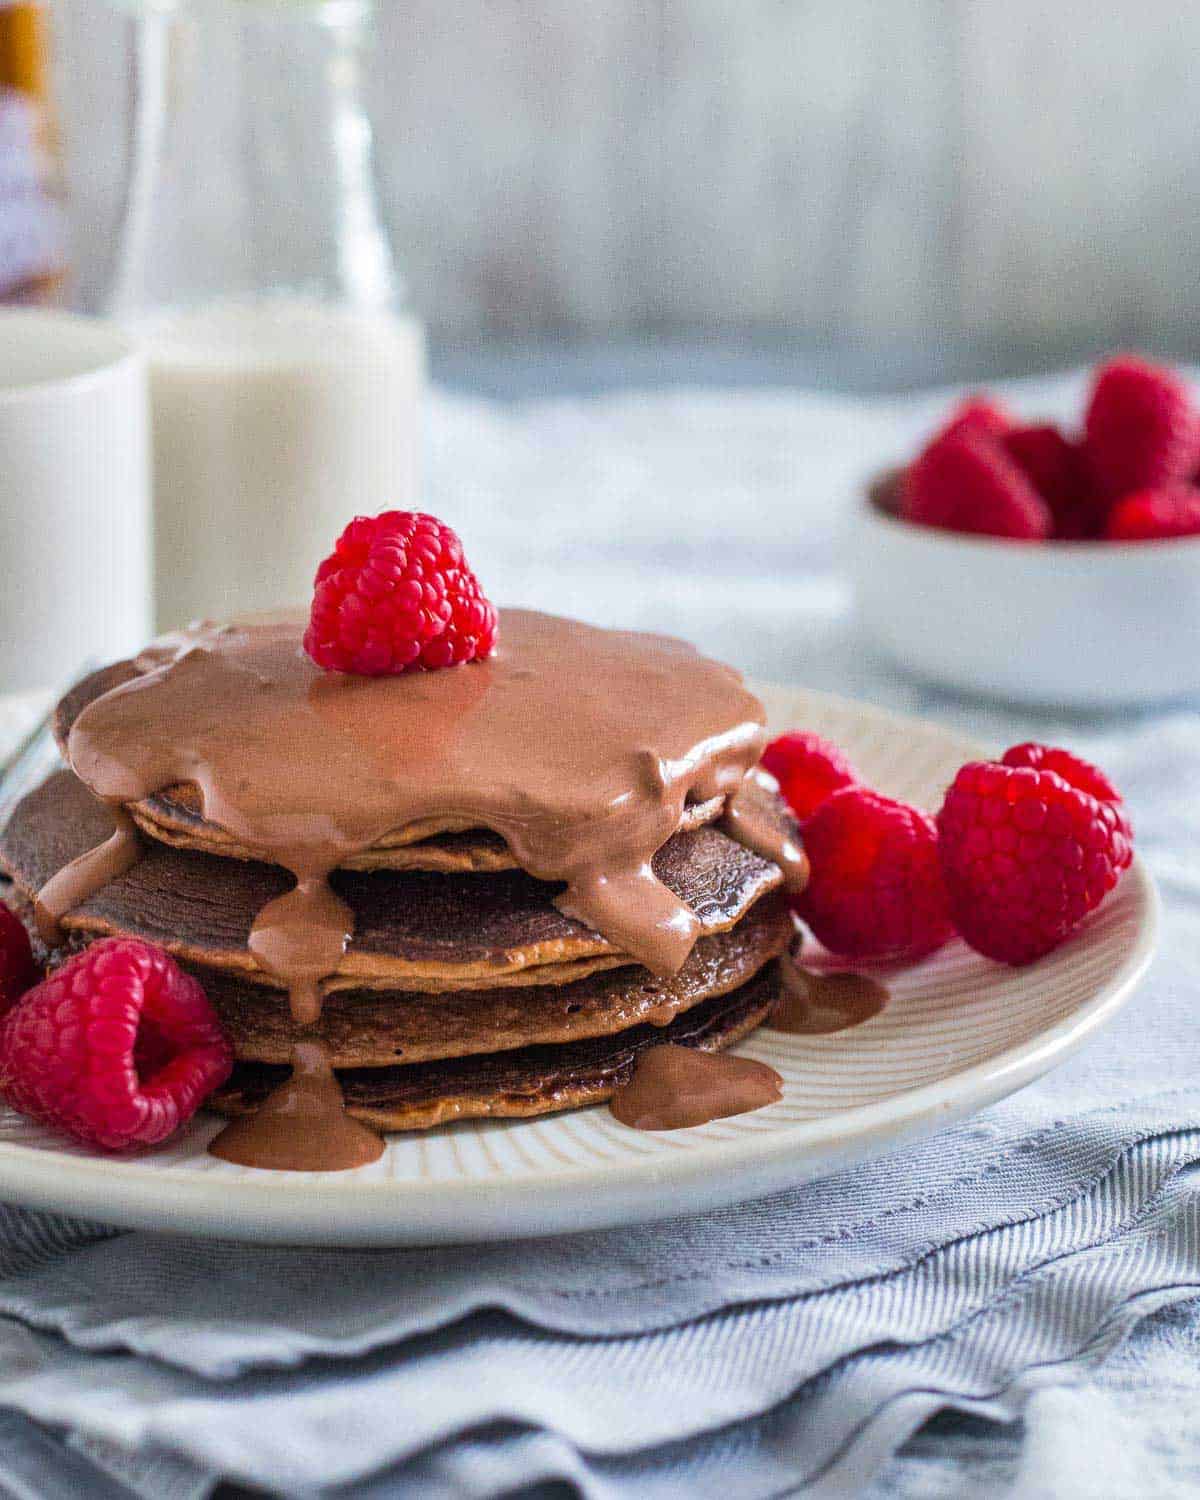 These chocolate protein pancakes are a healthy, indulgent breakfast packed with protein. Perfectly sweet, full of chocolate and good for you!